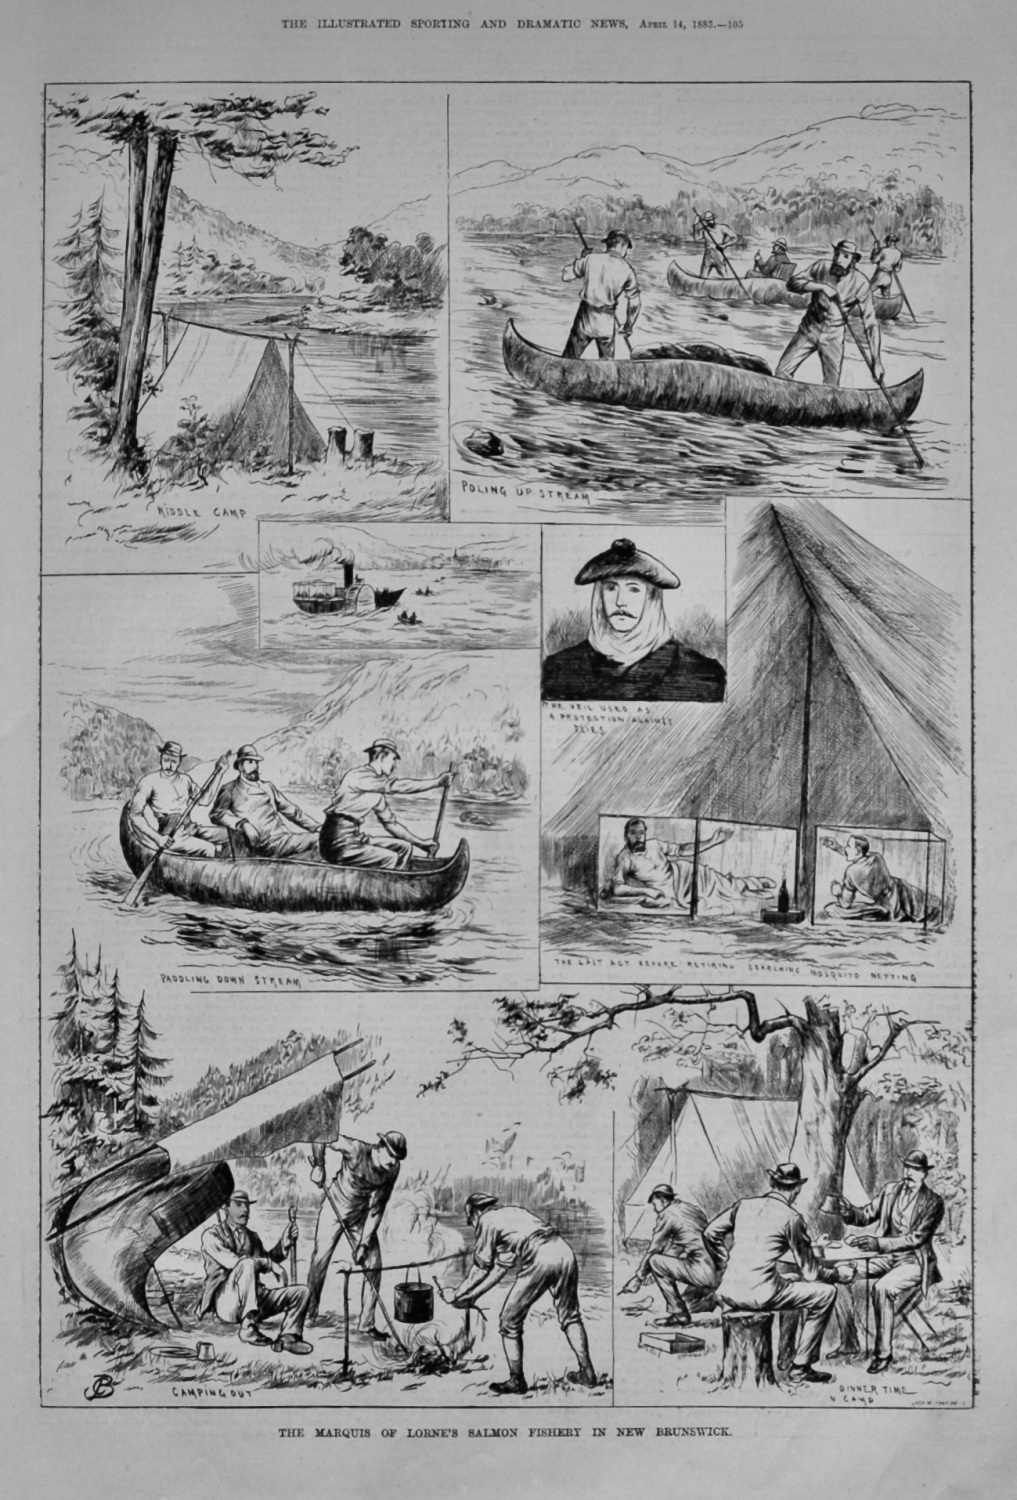 The Marquis of Lorne's Salmon Fishery in New Brunswick.  1883.